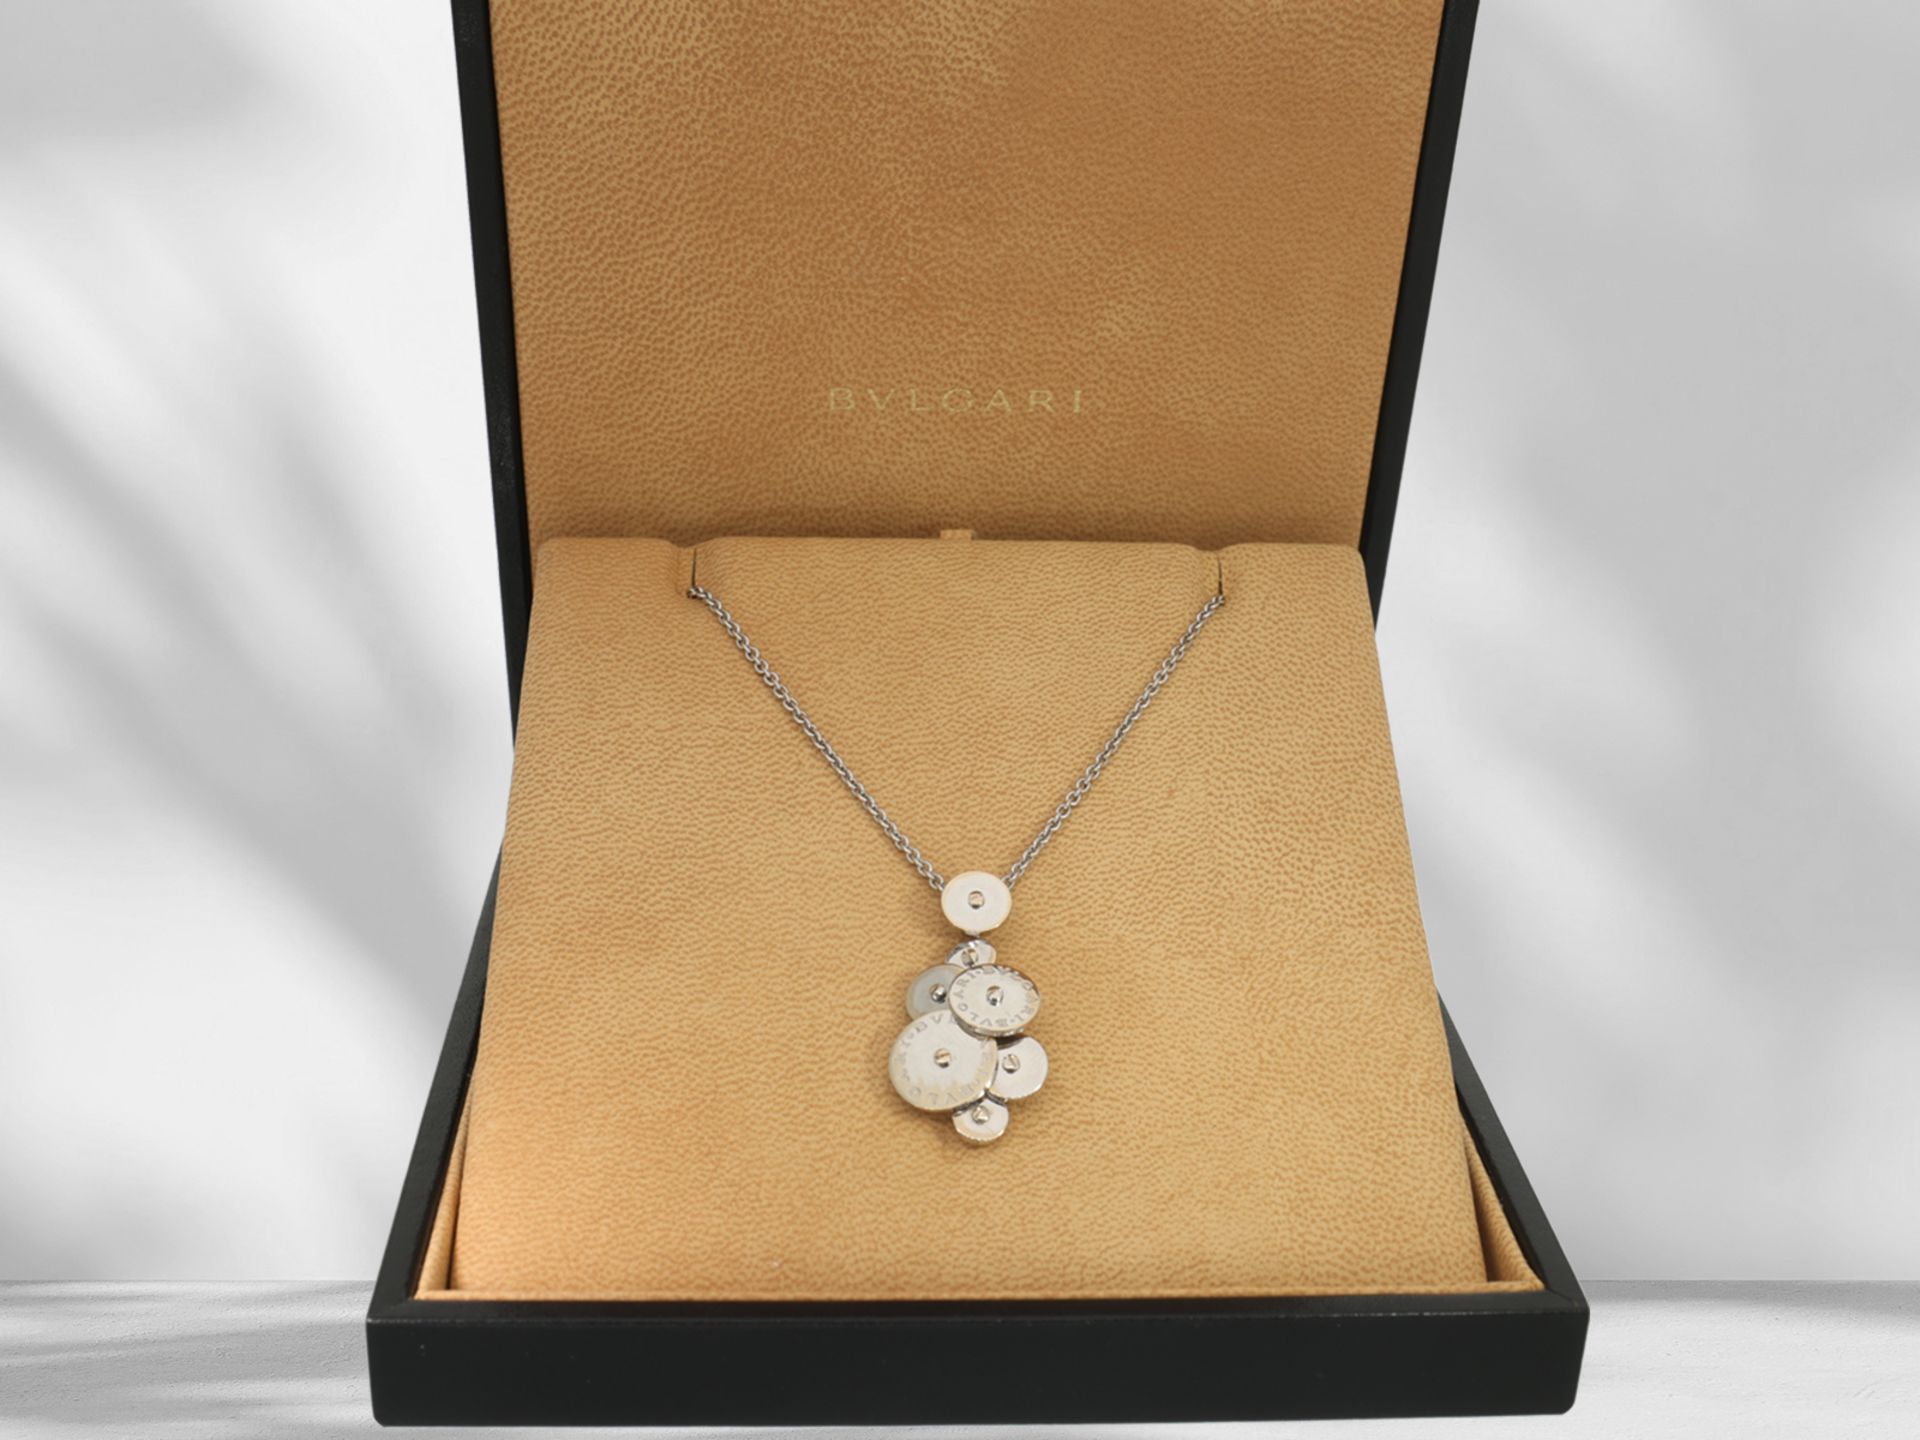 Necklace/chain: Italian designer necklace by Bvlgari with pendant, 18K white gold with original box - Image 4 of 4